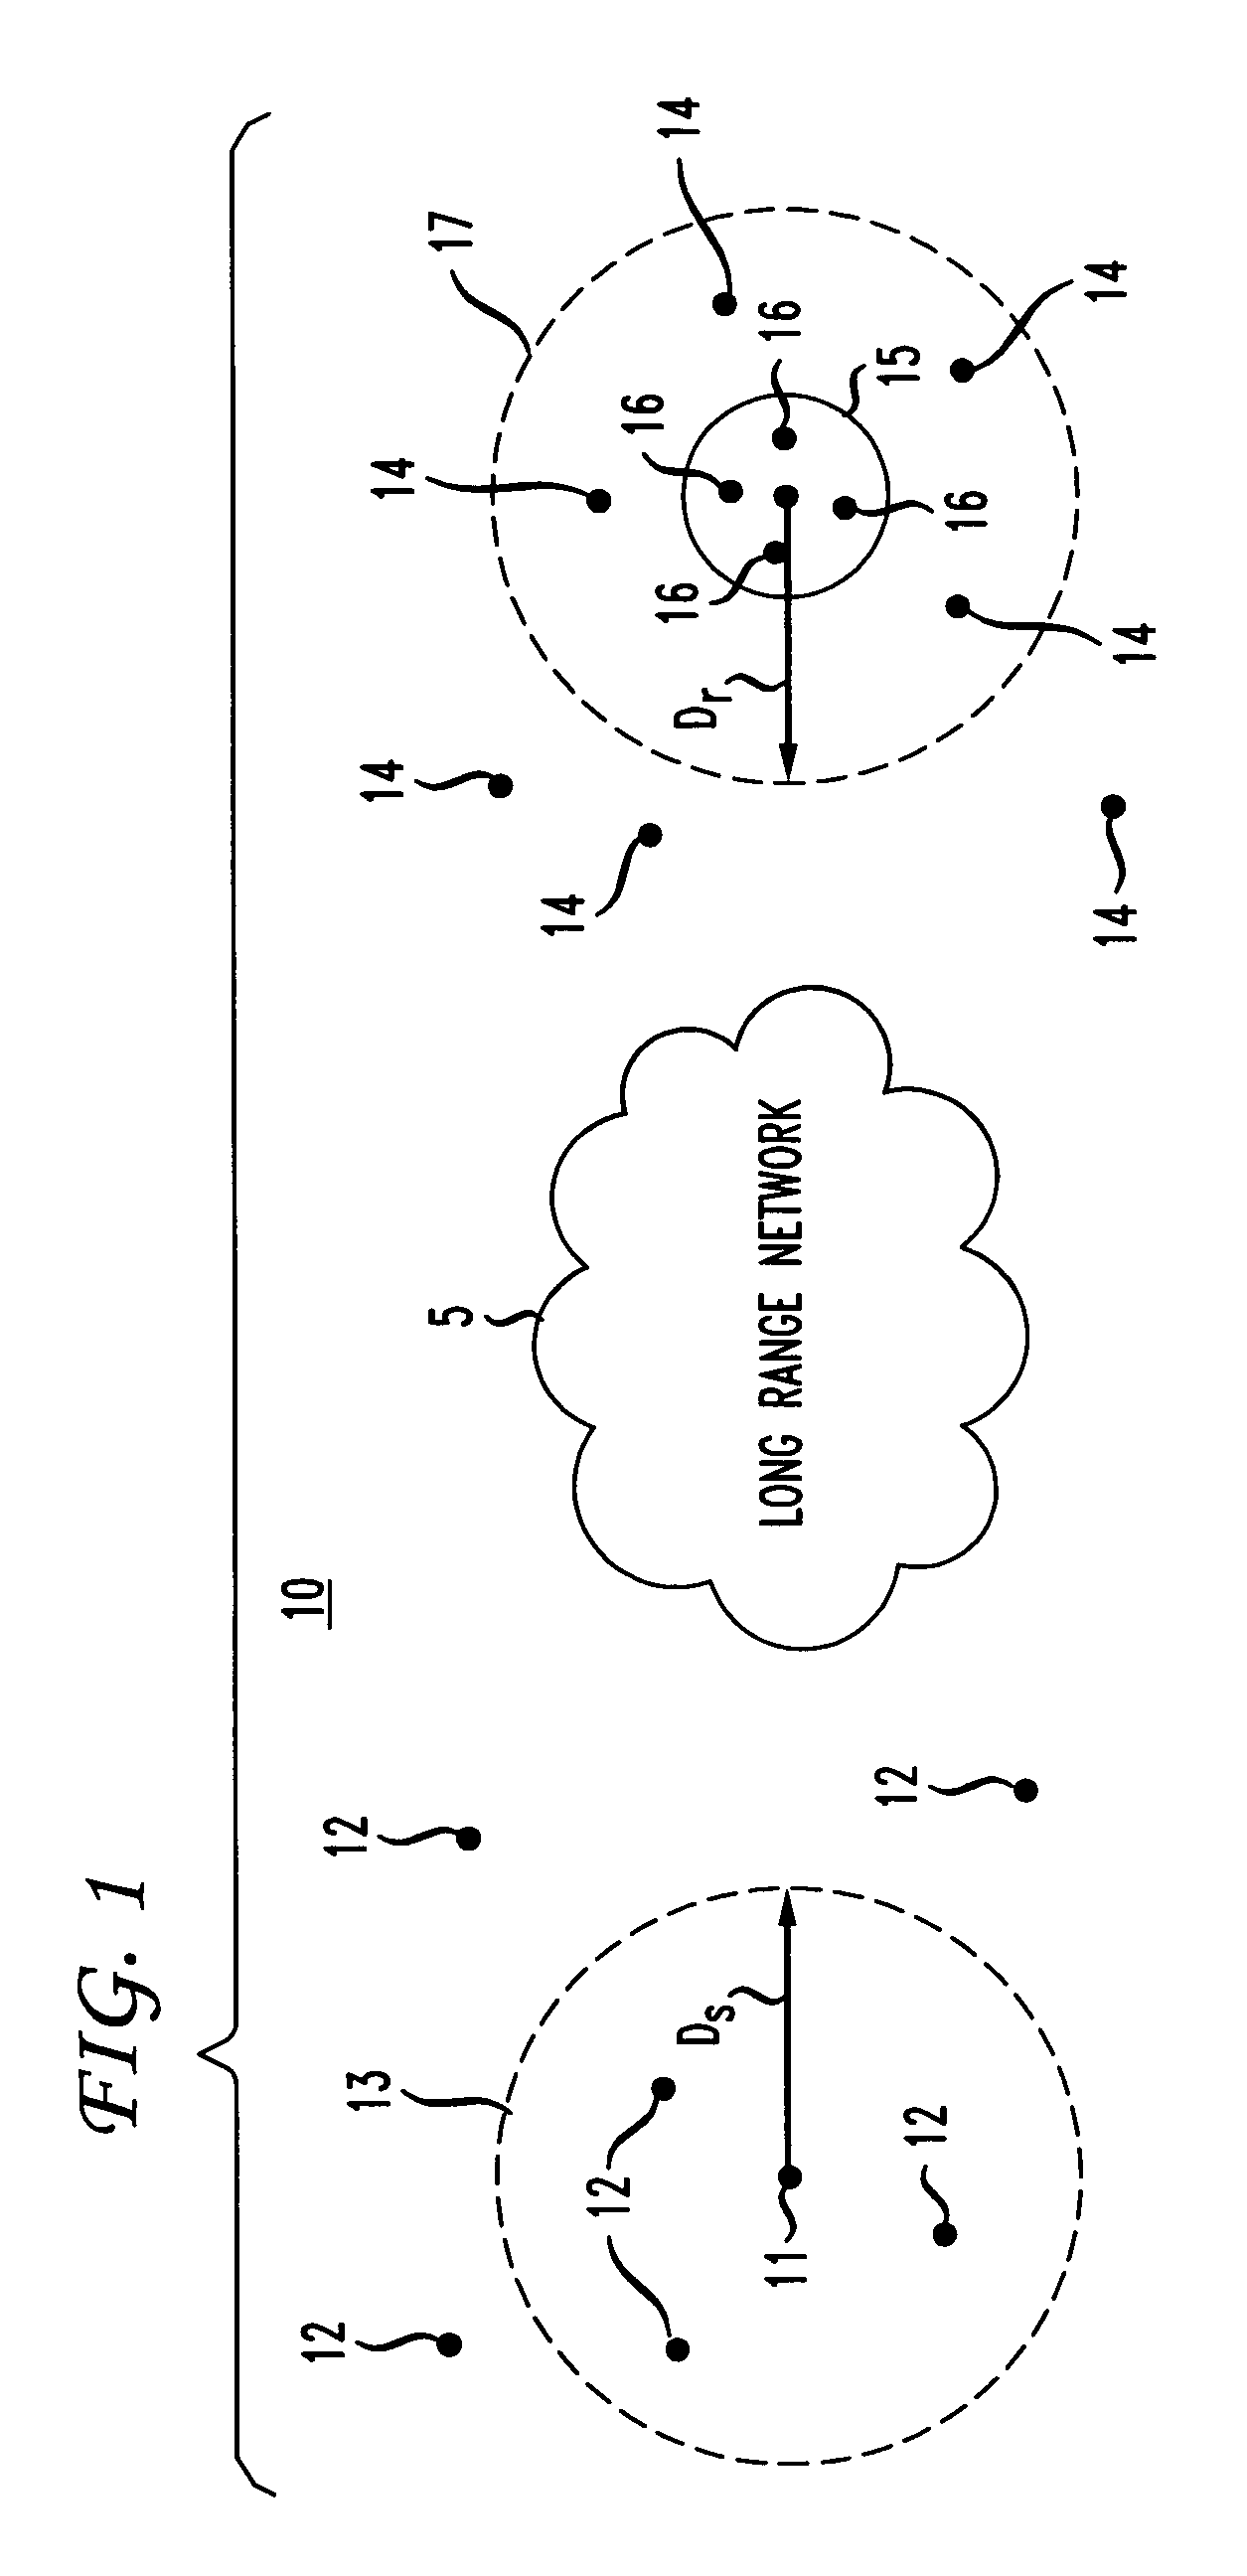 System and method for mobile ad hoc network